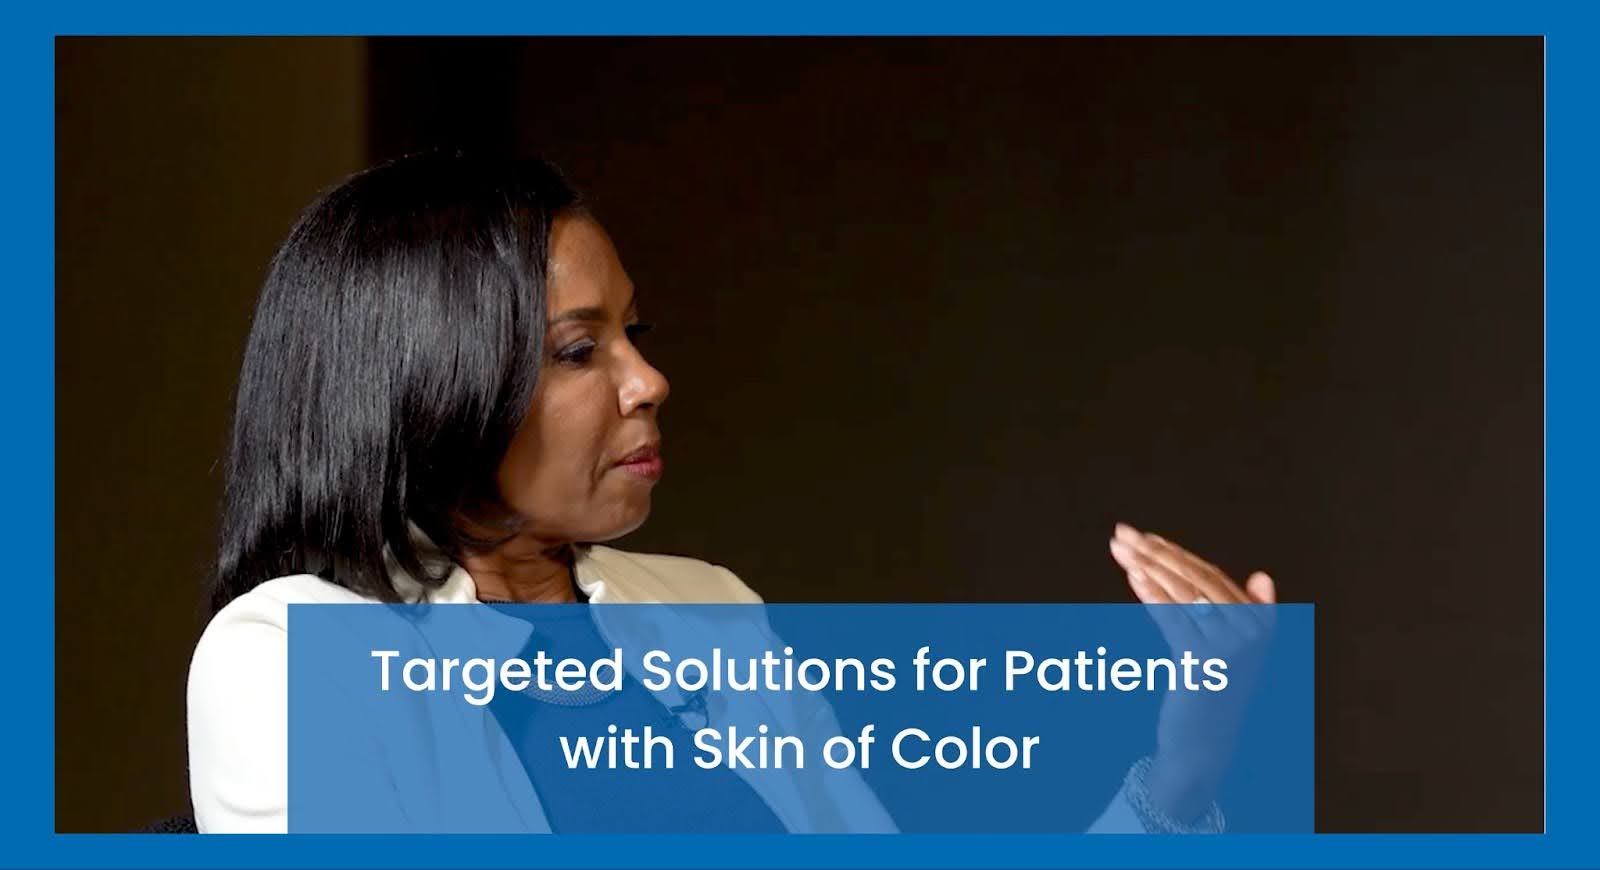 Targeted Solutions for Patients with Skin of Color